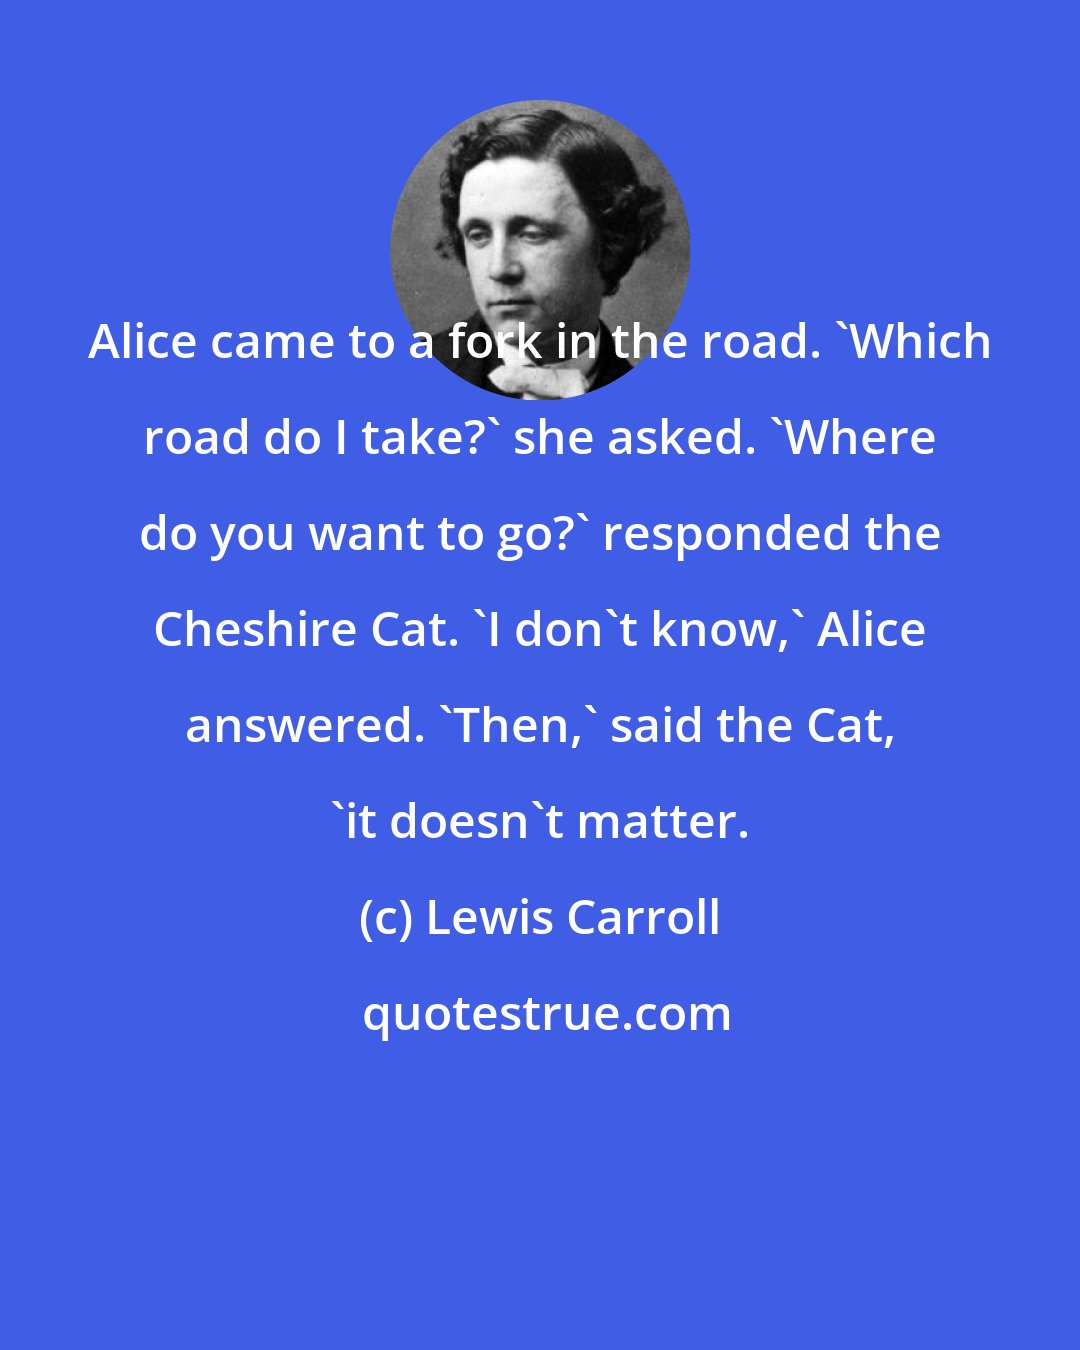 Lewis Carroll: Alice came to a fork in the road. 'Which road do I take?' she asked. 'Where do you want to go?' responded the Cheshire Cat. 'I don't know,' Alice answered. 'Then,' said the Cat, 'it doesn't matter.